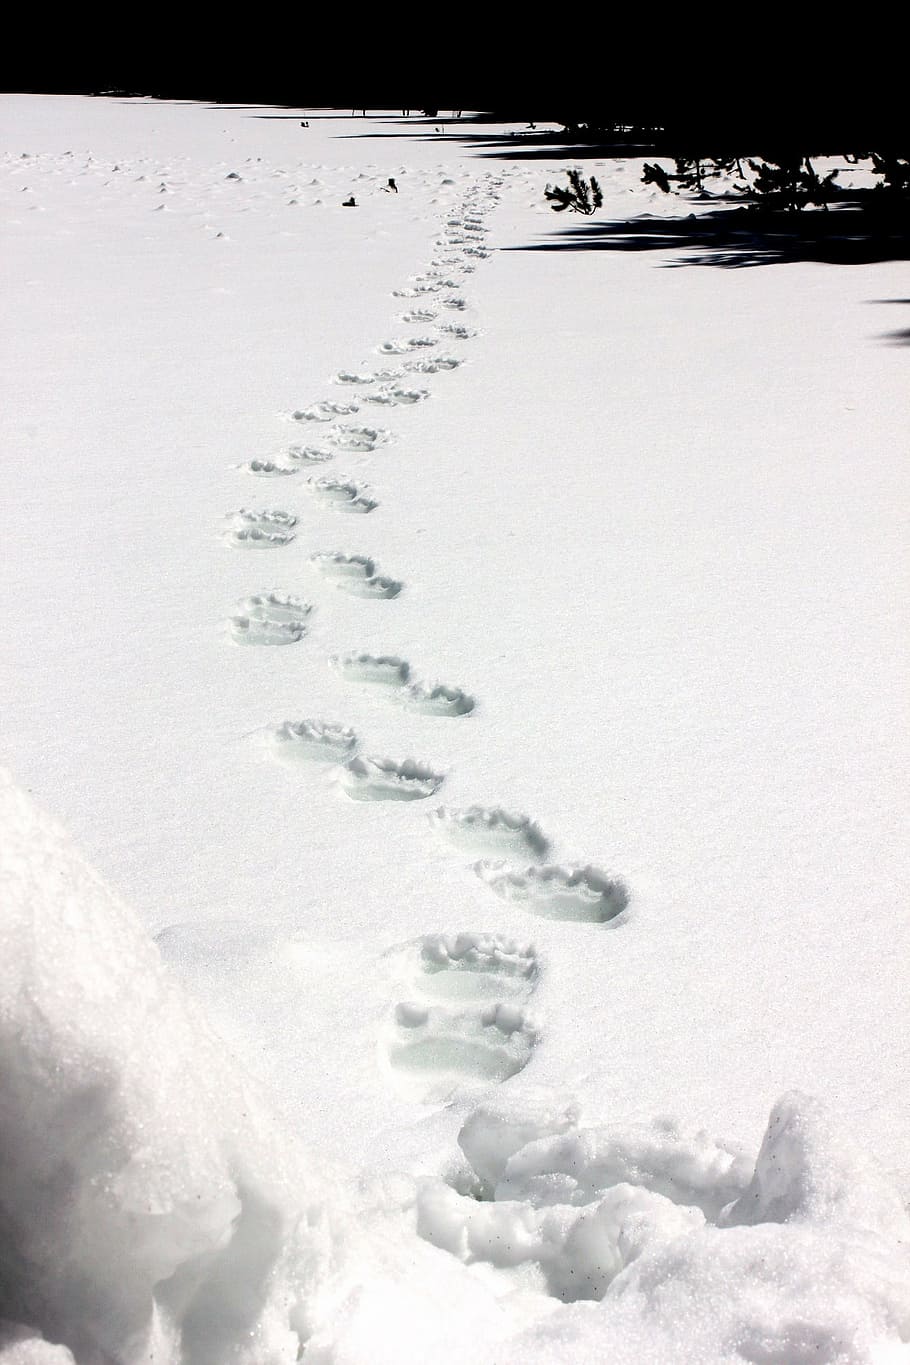 snow, covered, filled, footsteps, grizzly bear tracks, wildlife, nature, winter, cold, footprint